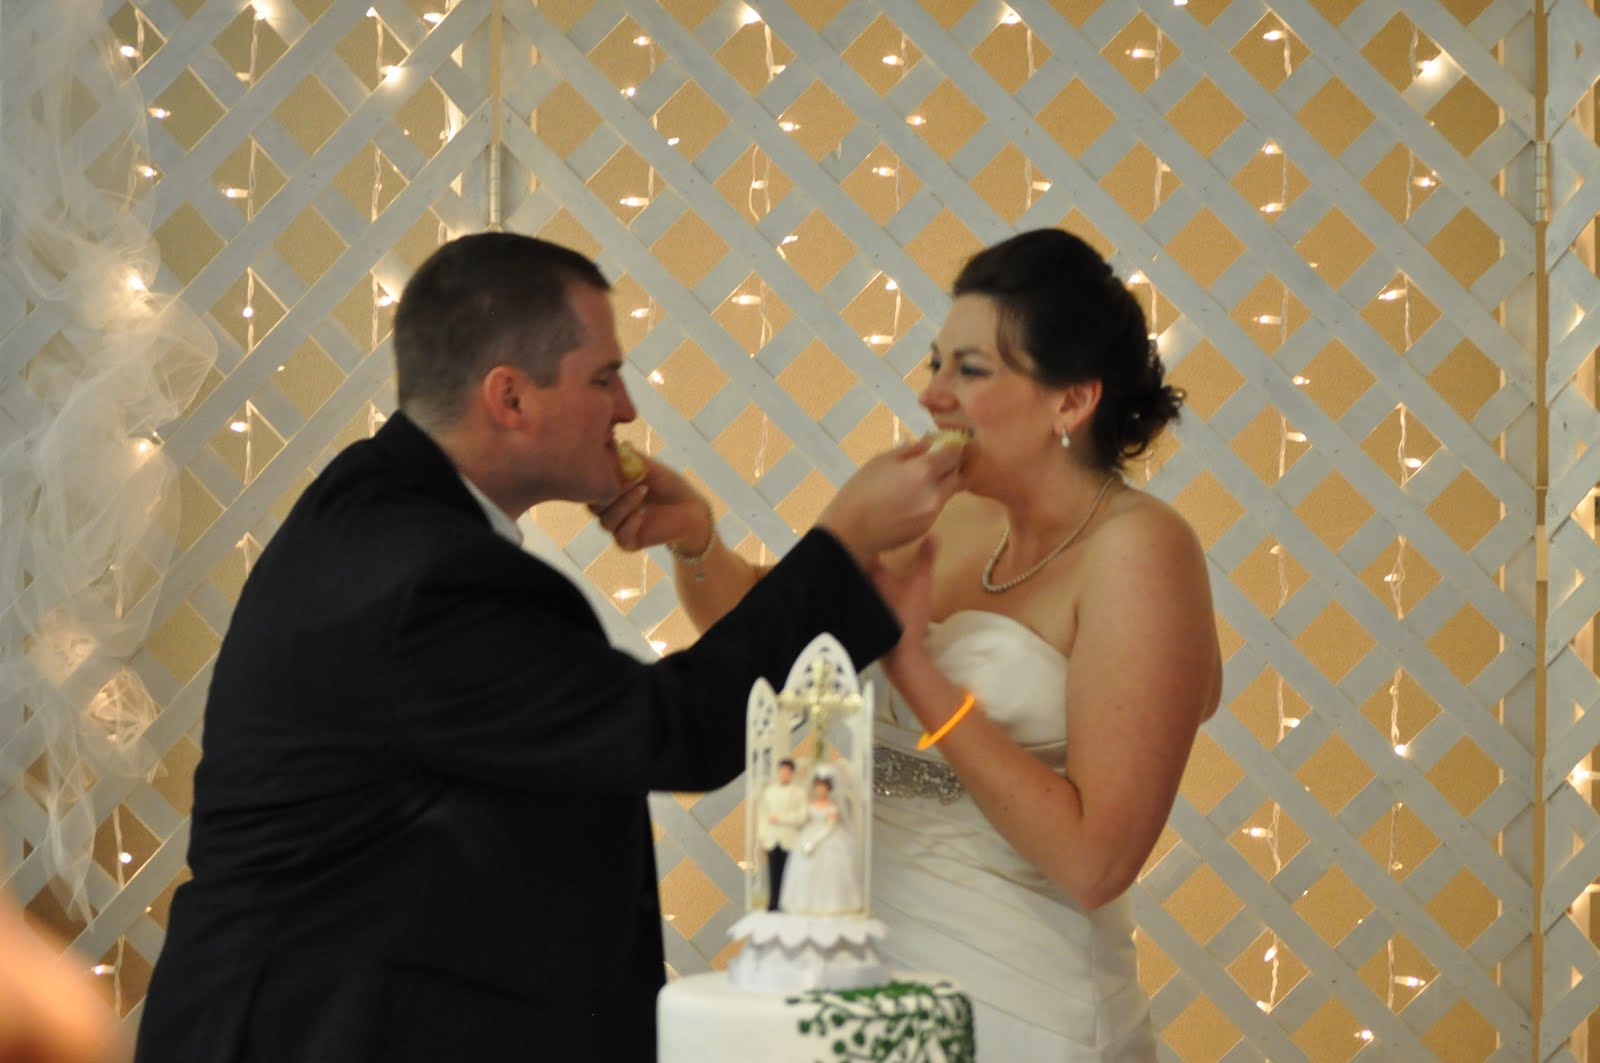 Married: May 29, 2011